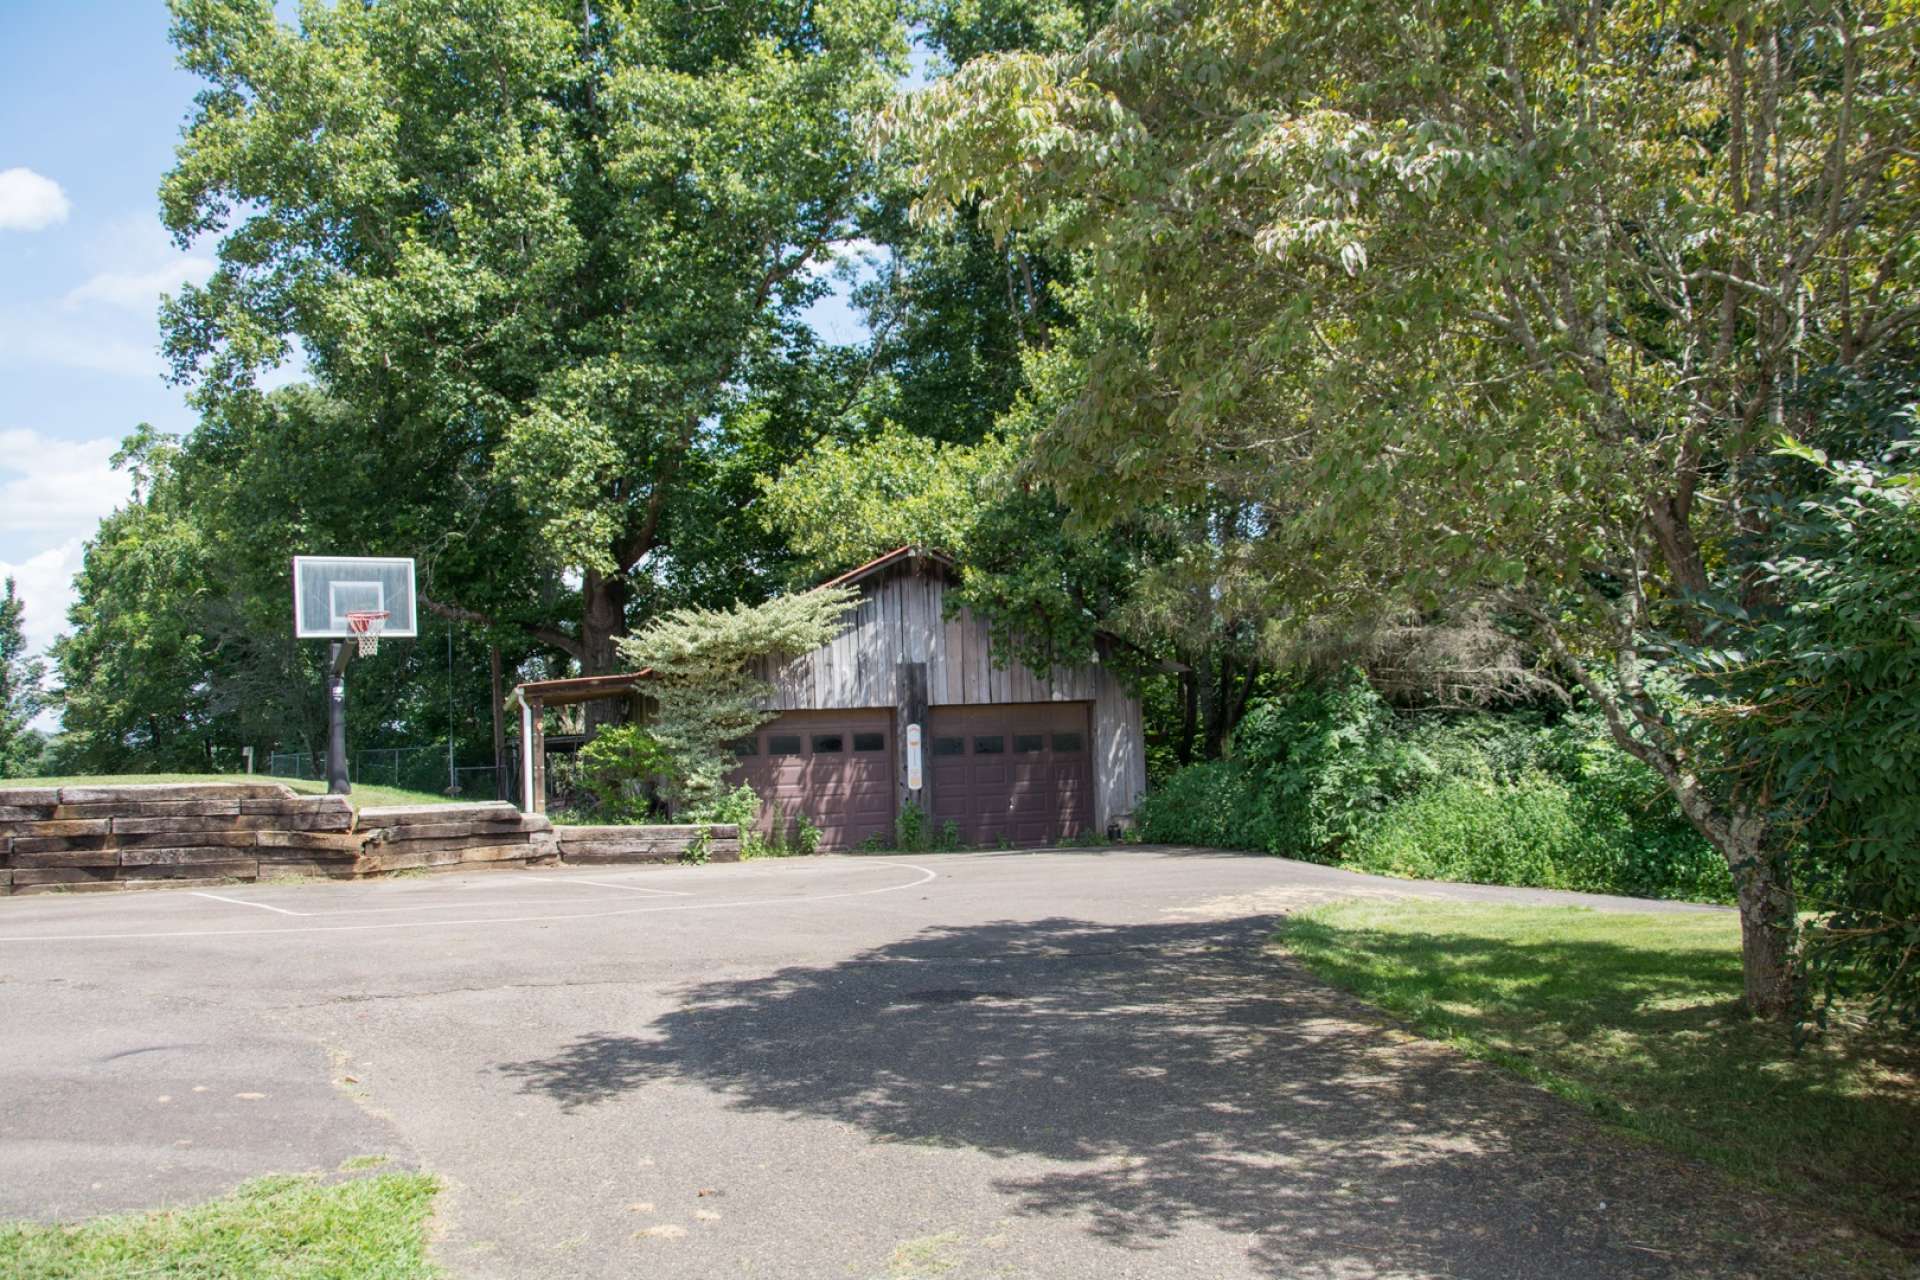 An added bonus is the detached garages, equipment shed, barns, and this paved space that is perfect for parking or basketball.